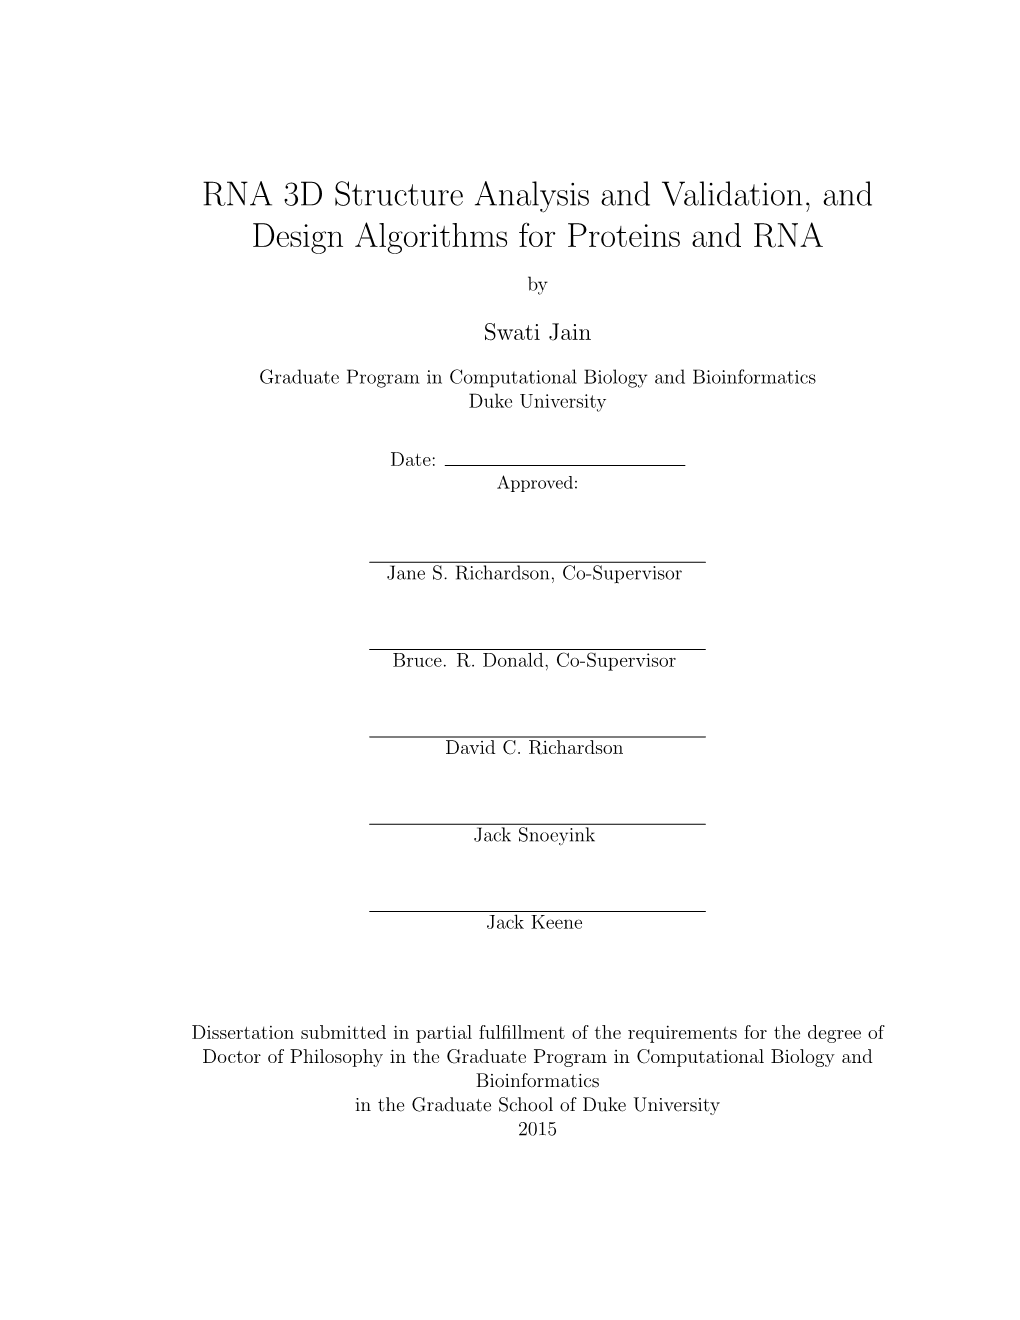 RNA 3D Structure Analysis and Validation, and Design Algorithms for Proteins and RNA